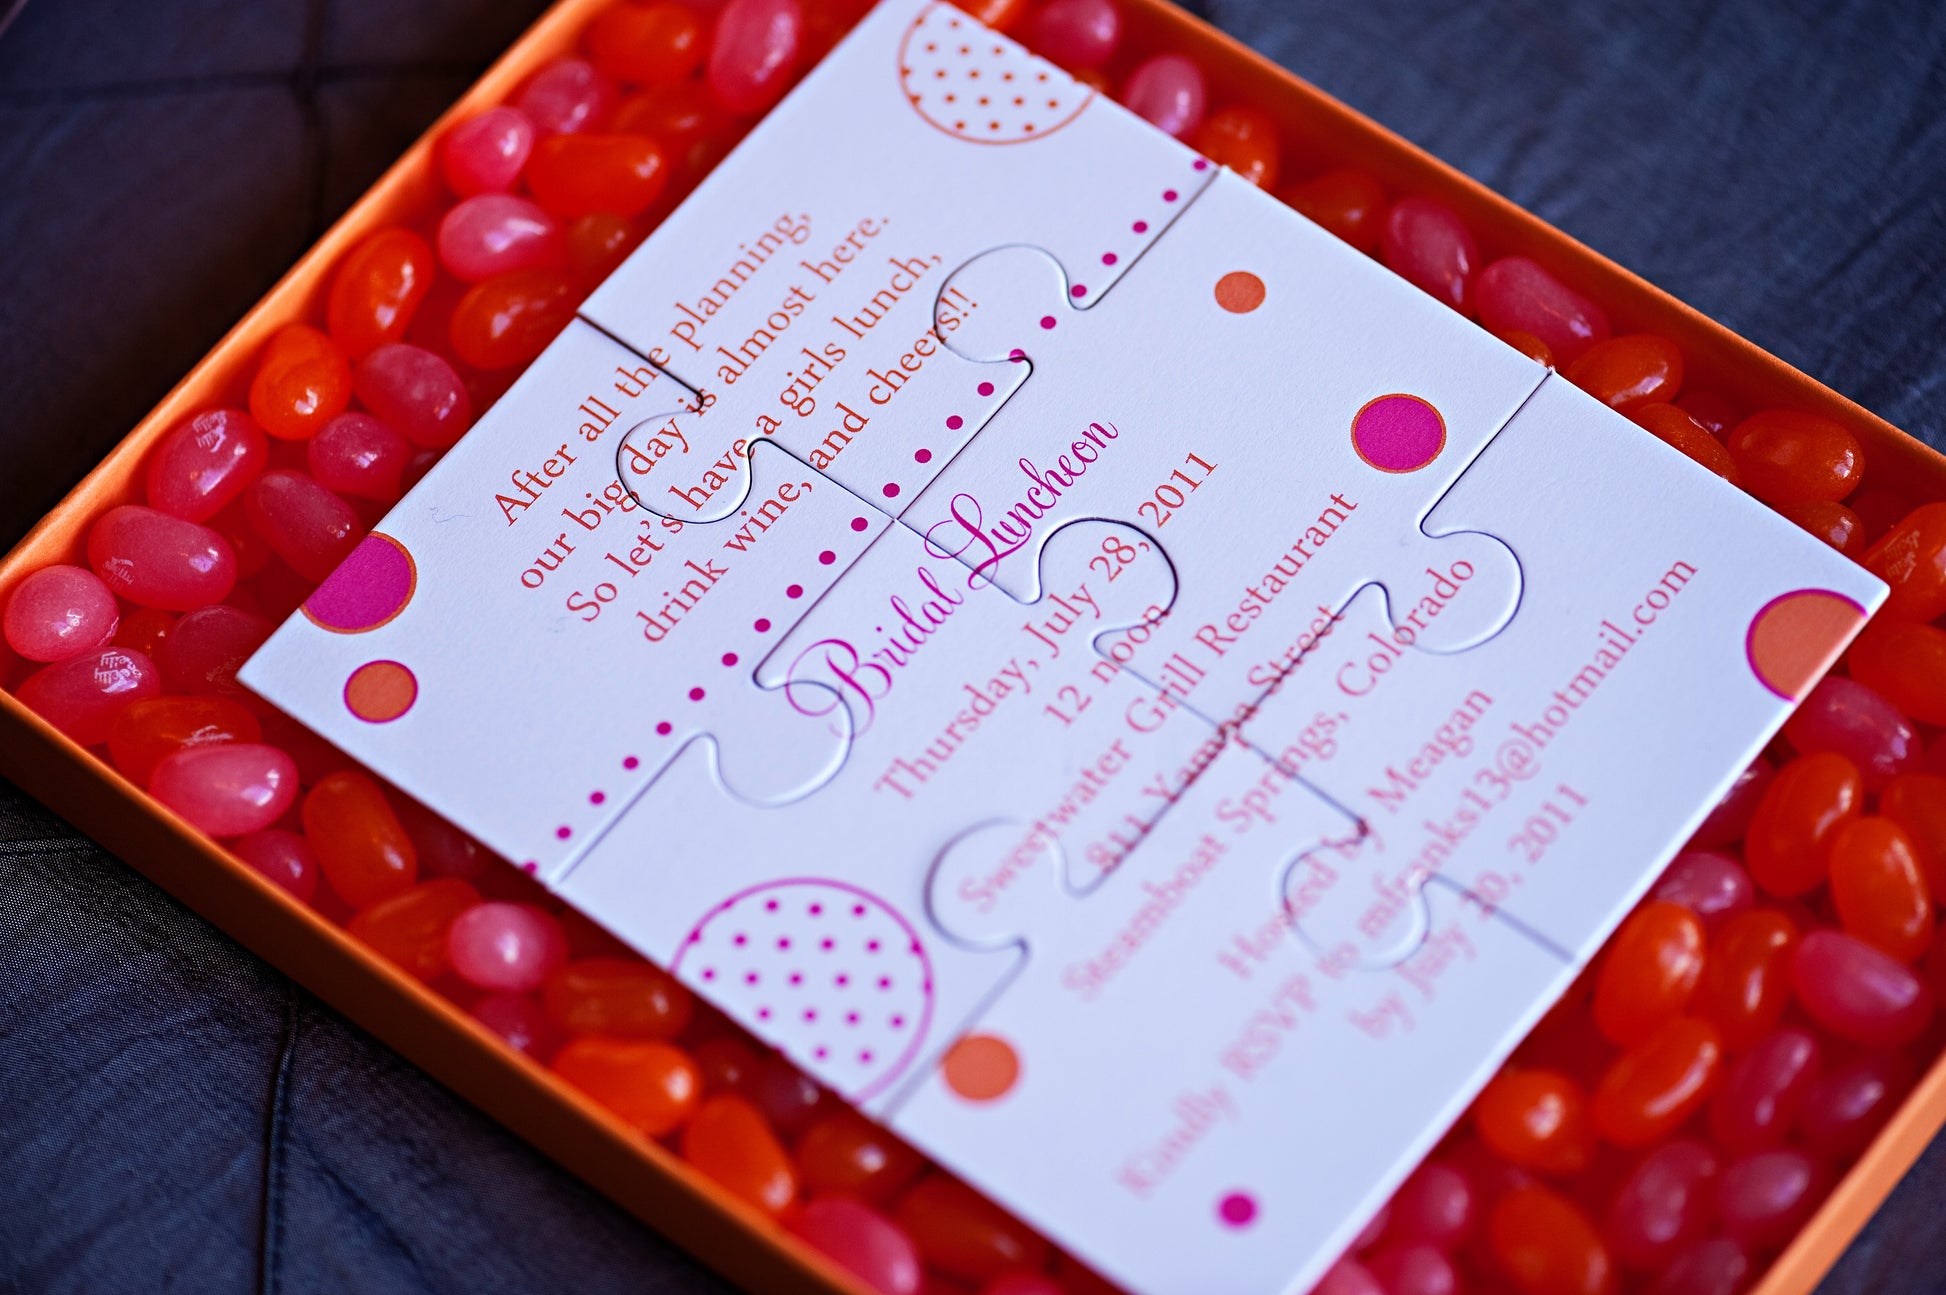 Puzzle Invitation for the Fun and Interactive Wedding or Party - Idea Chíc